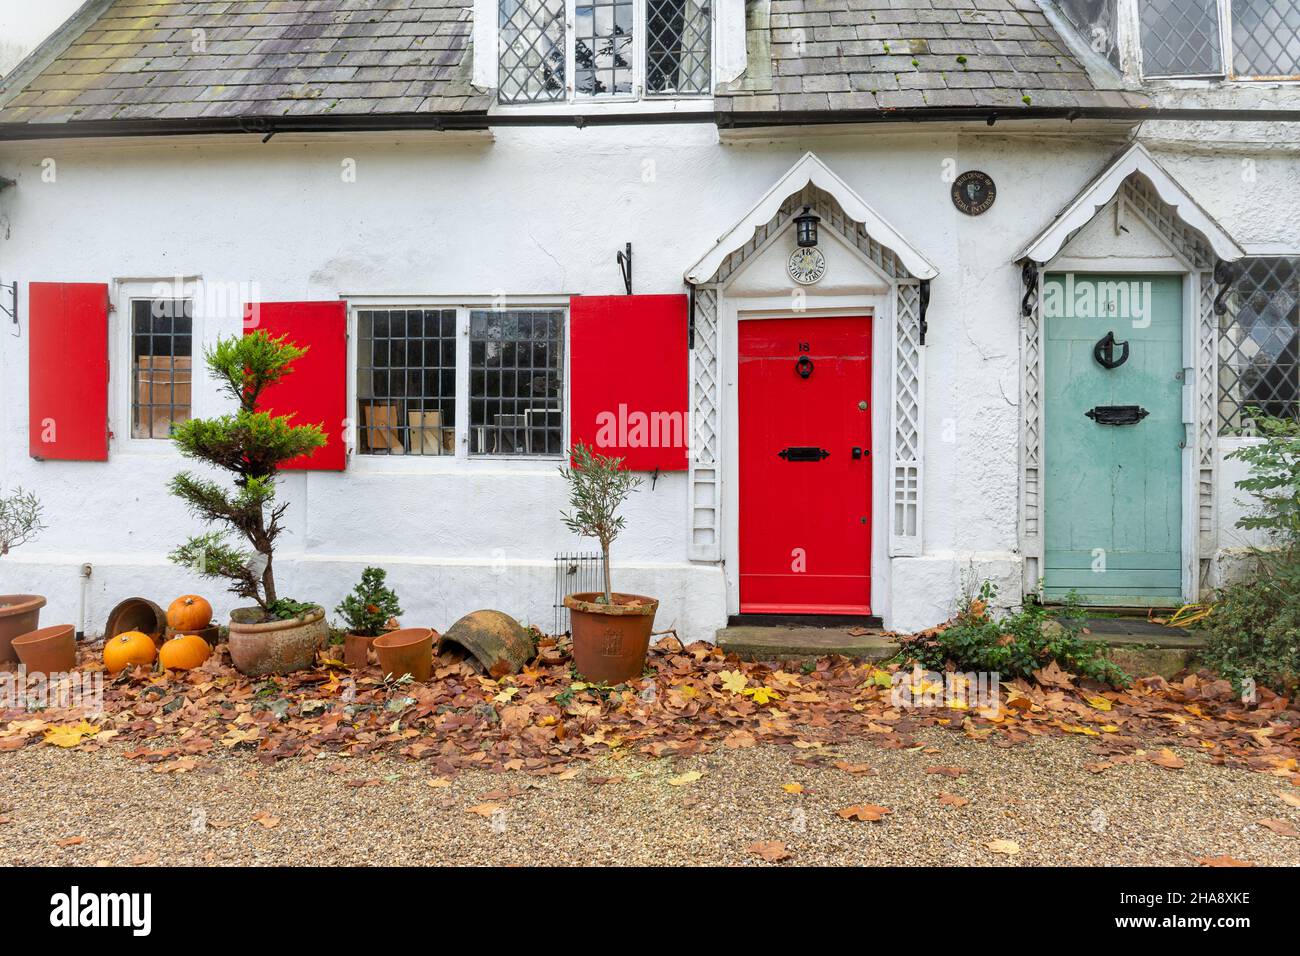 16 and 18, The Street, Shalford, Surrey, England, UK. Grade II Listed Building, 17th century cottages with colourful doors and shutters in the village Stock Photo